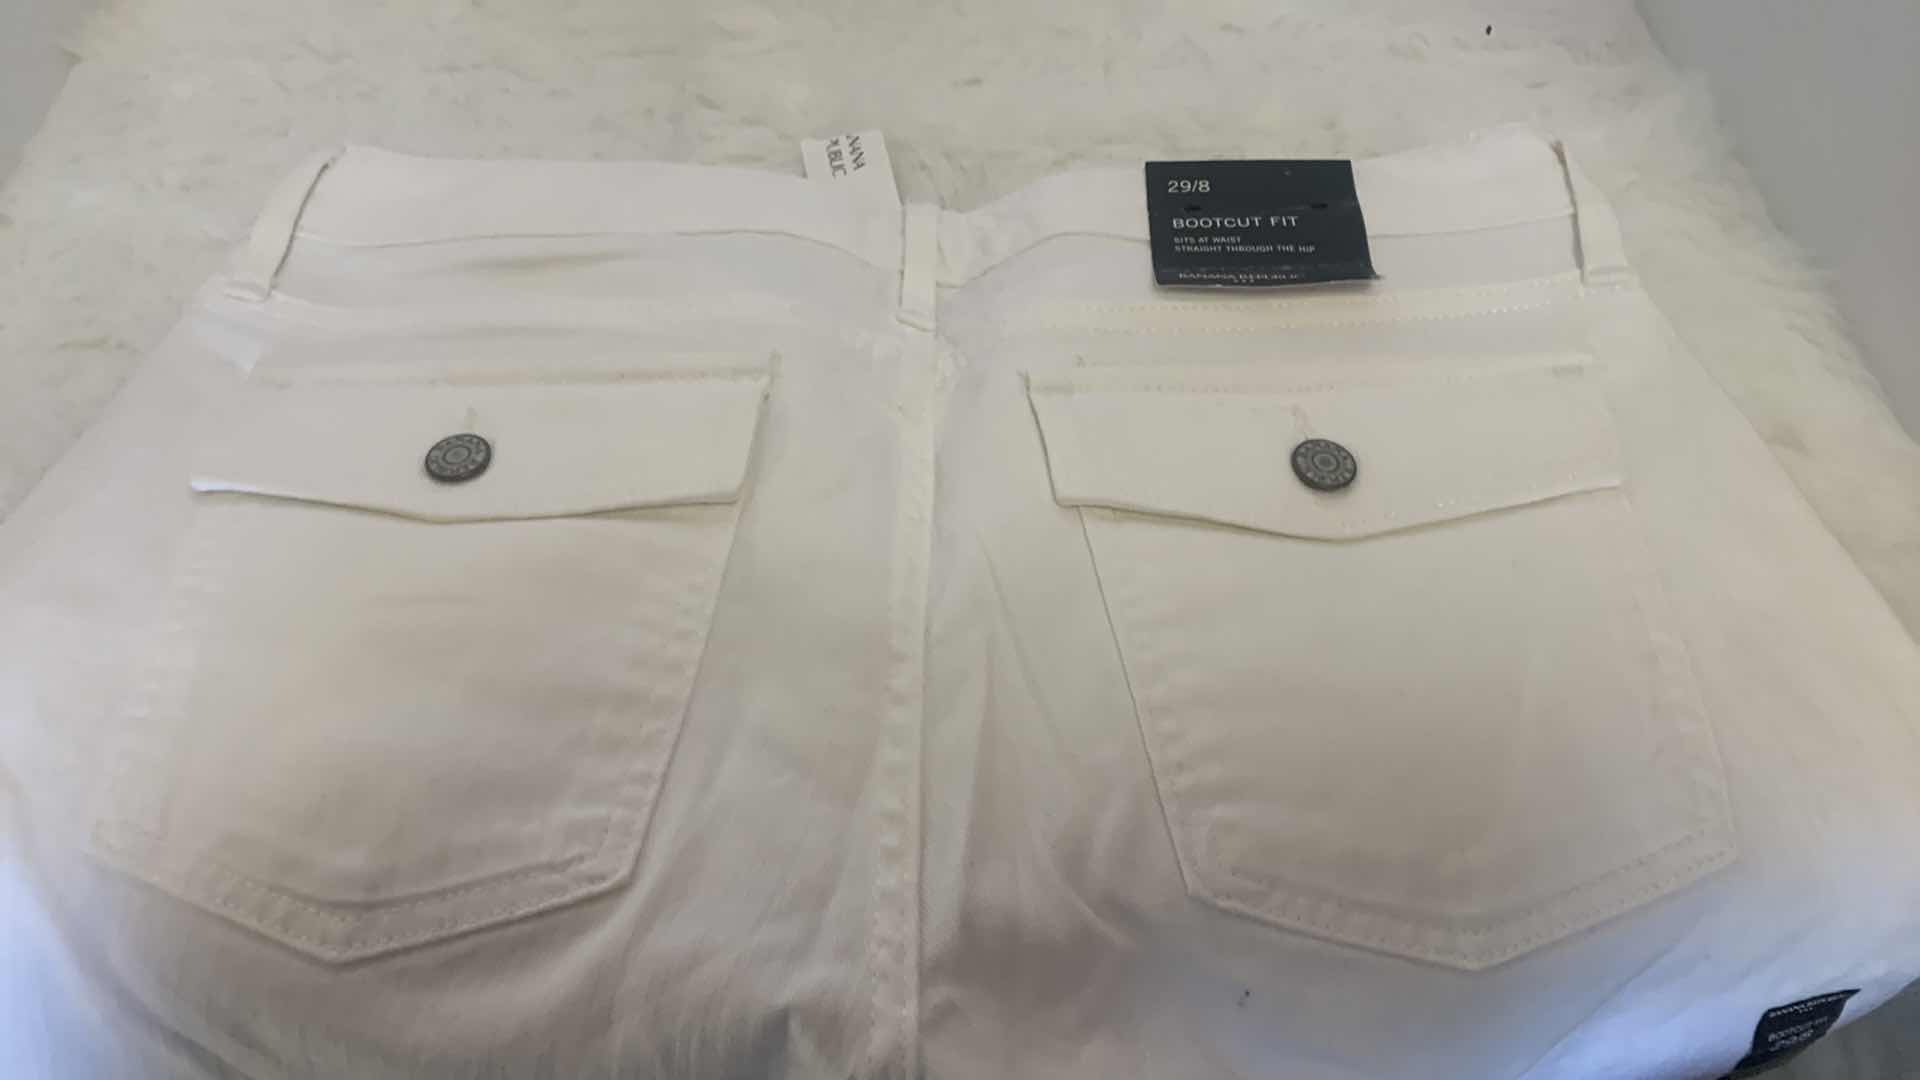 Photo 1 of WOMENS CLOTHING, BANANA REPUBLIC NEW WITH TAGS SIZE 29/8 WHITE BOOTCUT FIT JEANS